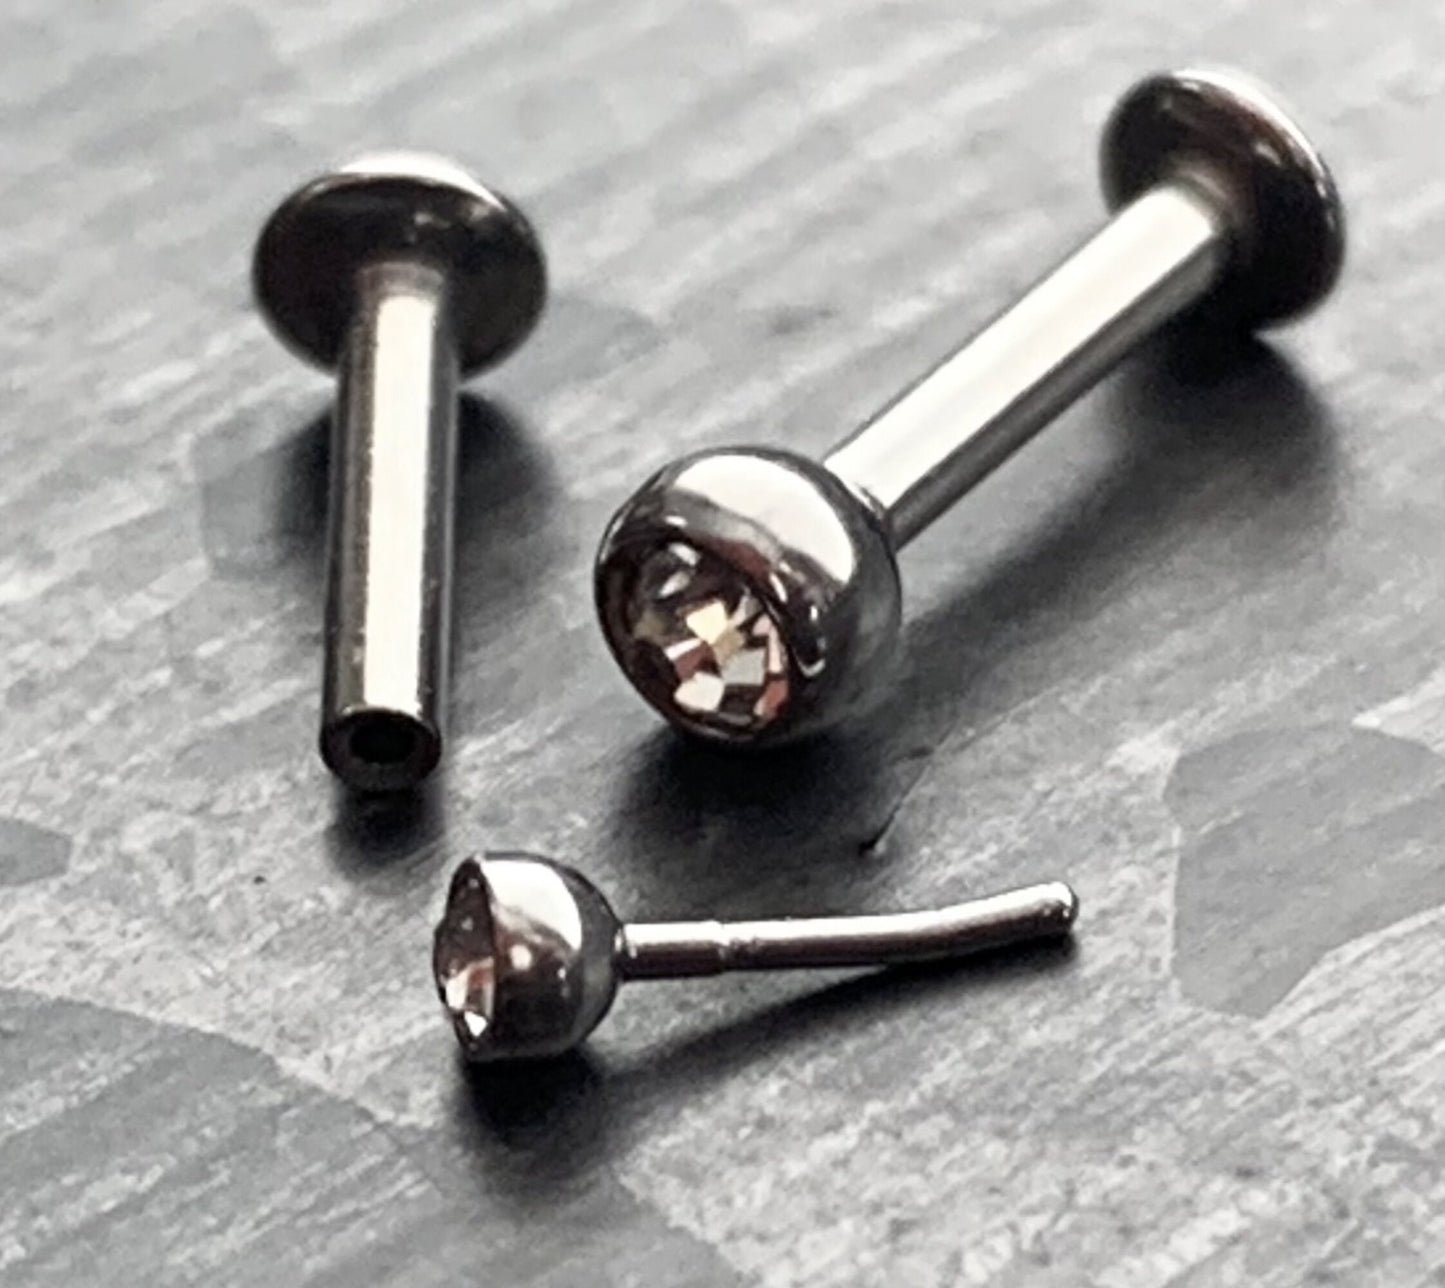 1 Piece of Stunning Push In Press Fit CZ Gem Labret Stud Lip Ring - 16g - Gem Size: 2mm, 3mm - Length 6mm, 8mm, 10mm Available!